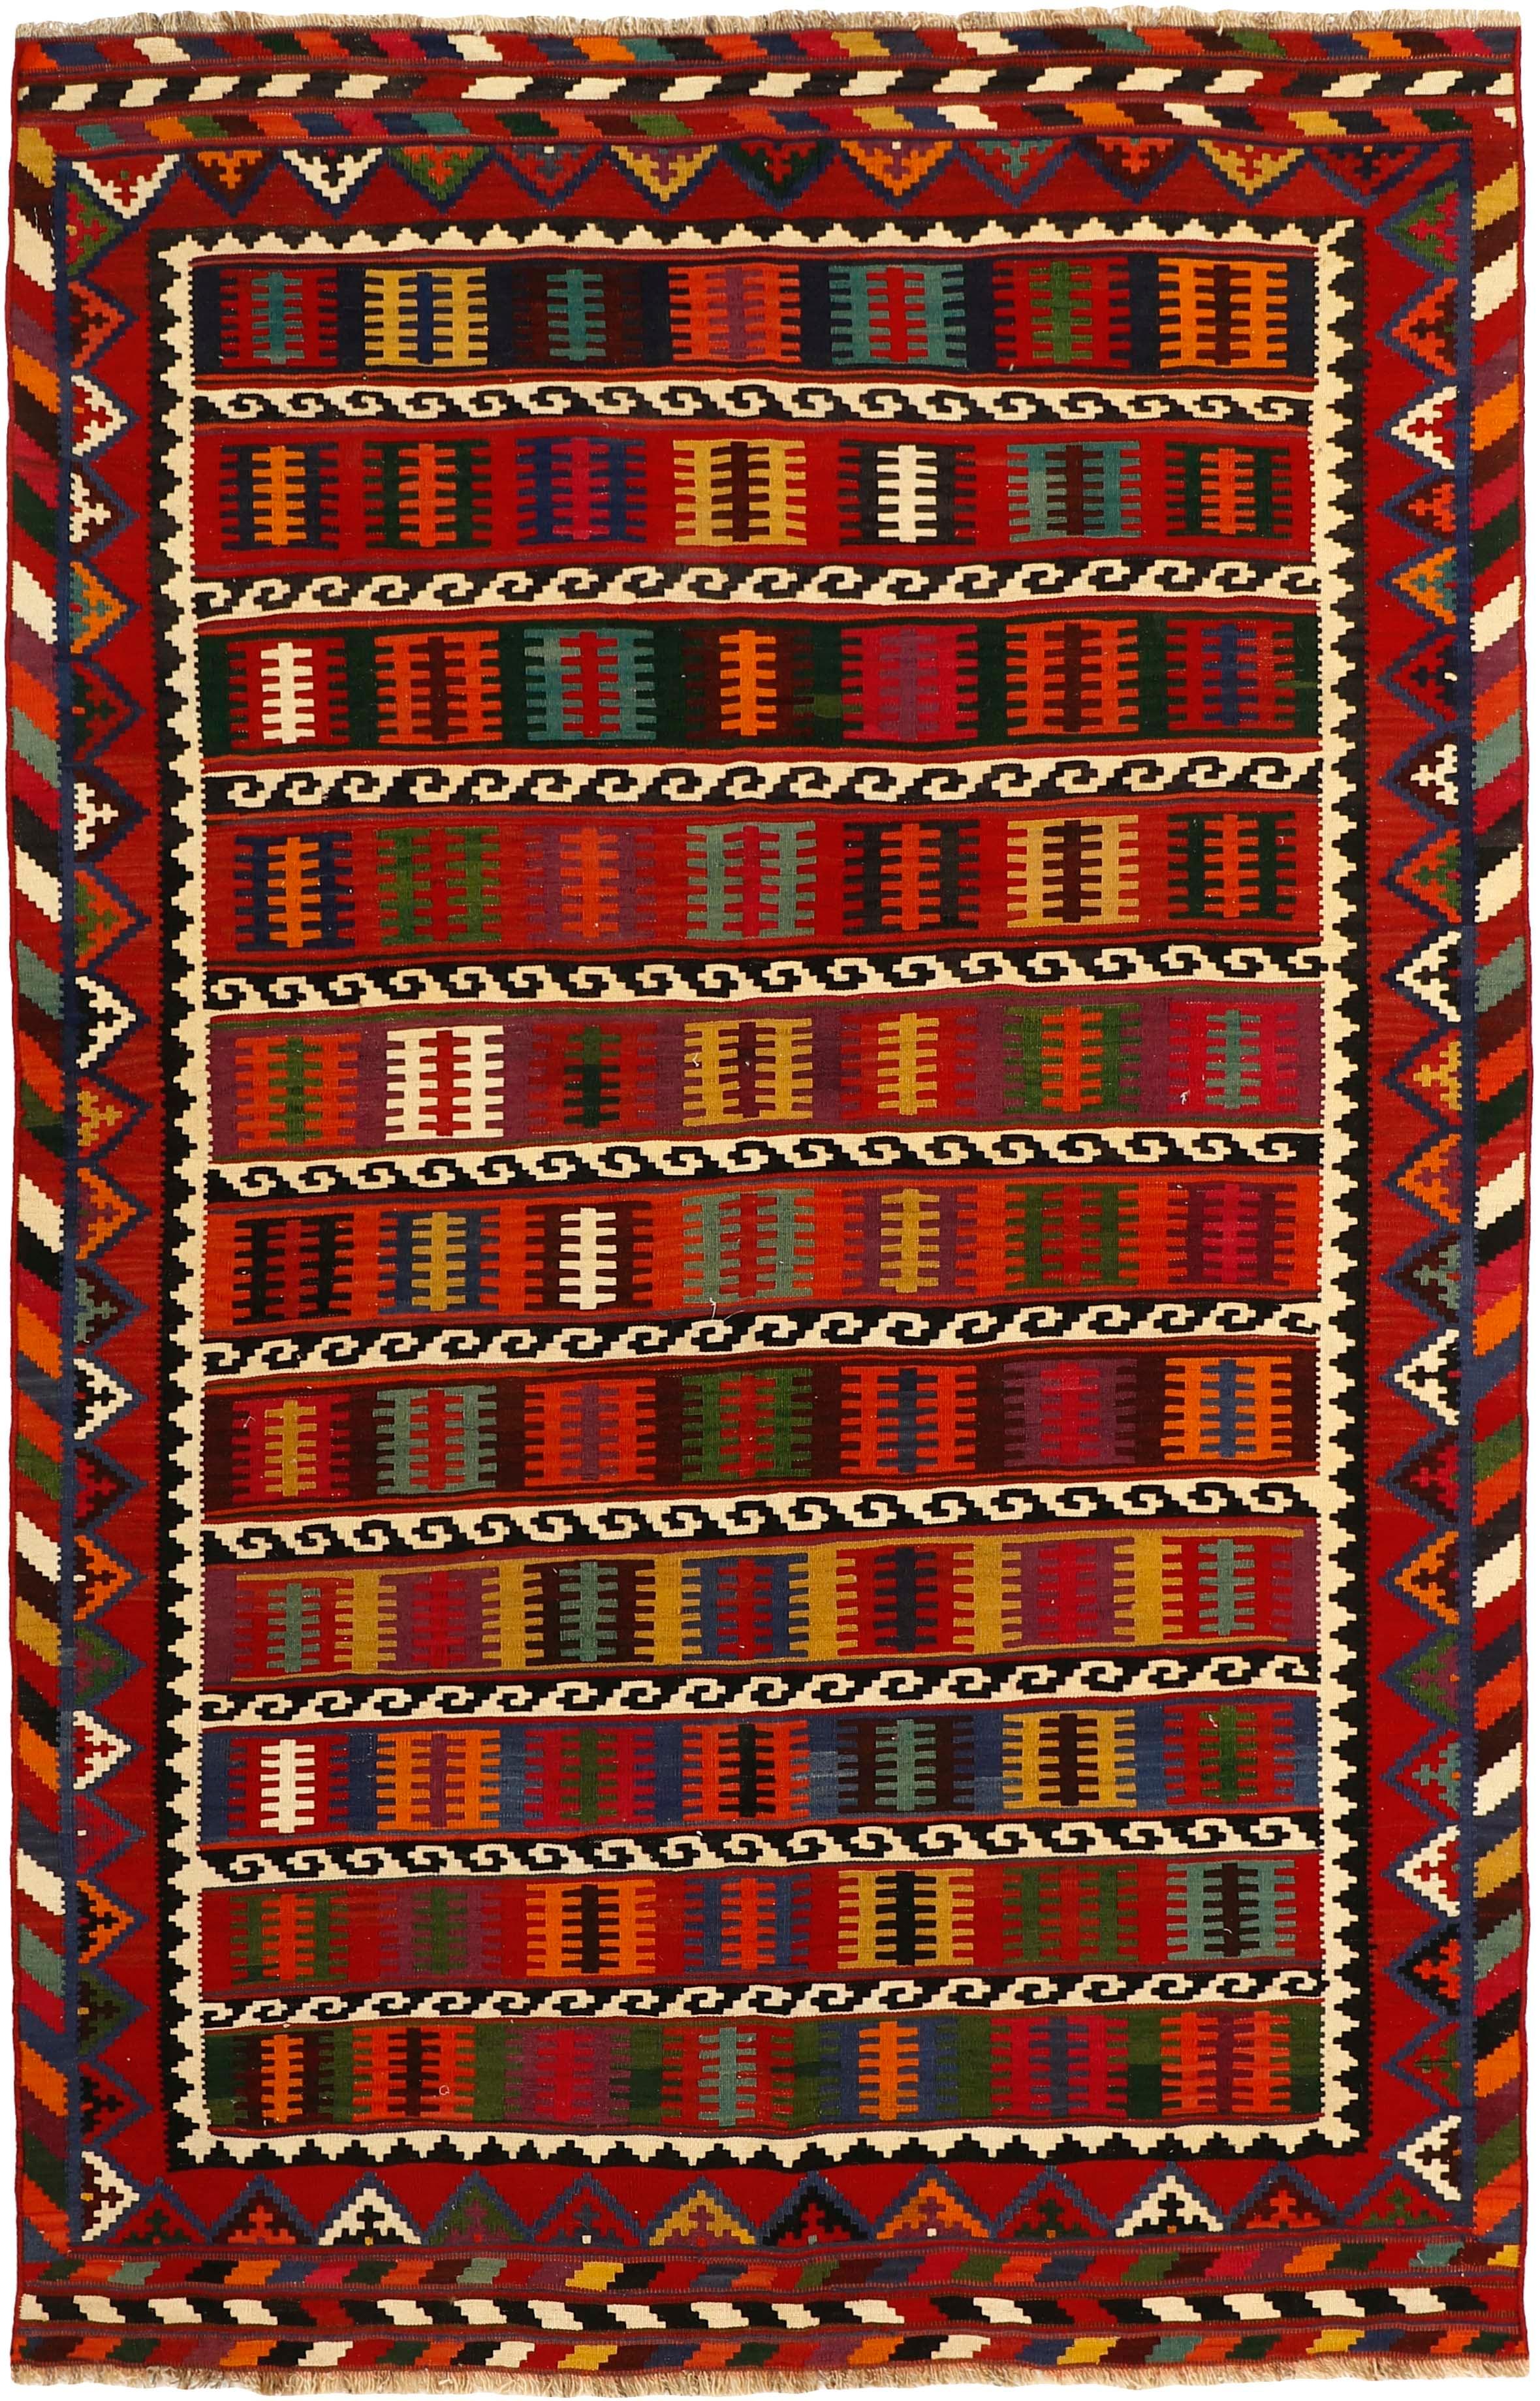 Authentic persian kelim flatweave rug with traditional stripe design in red, beige, brown and black